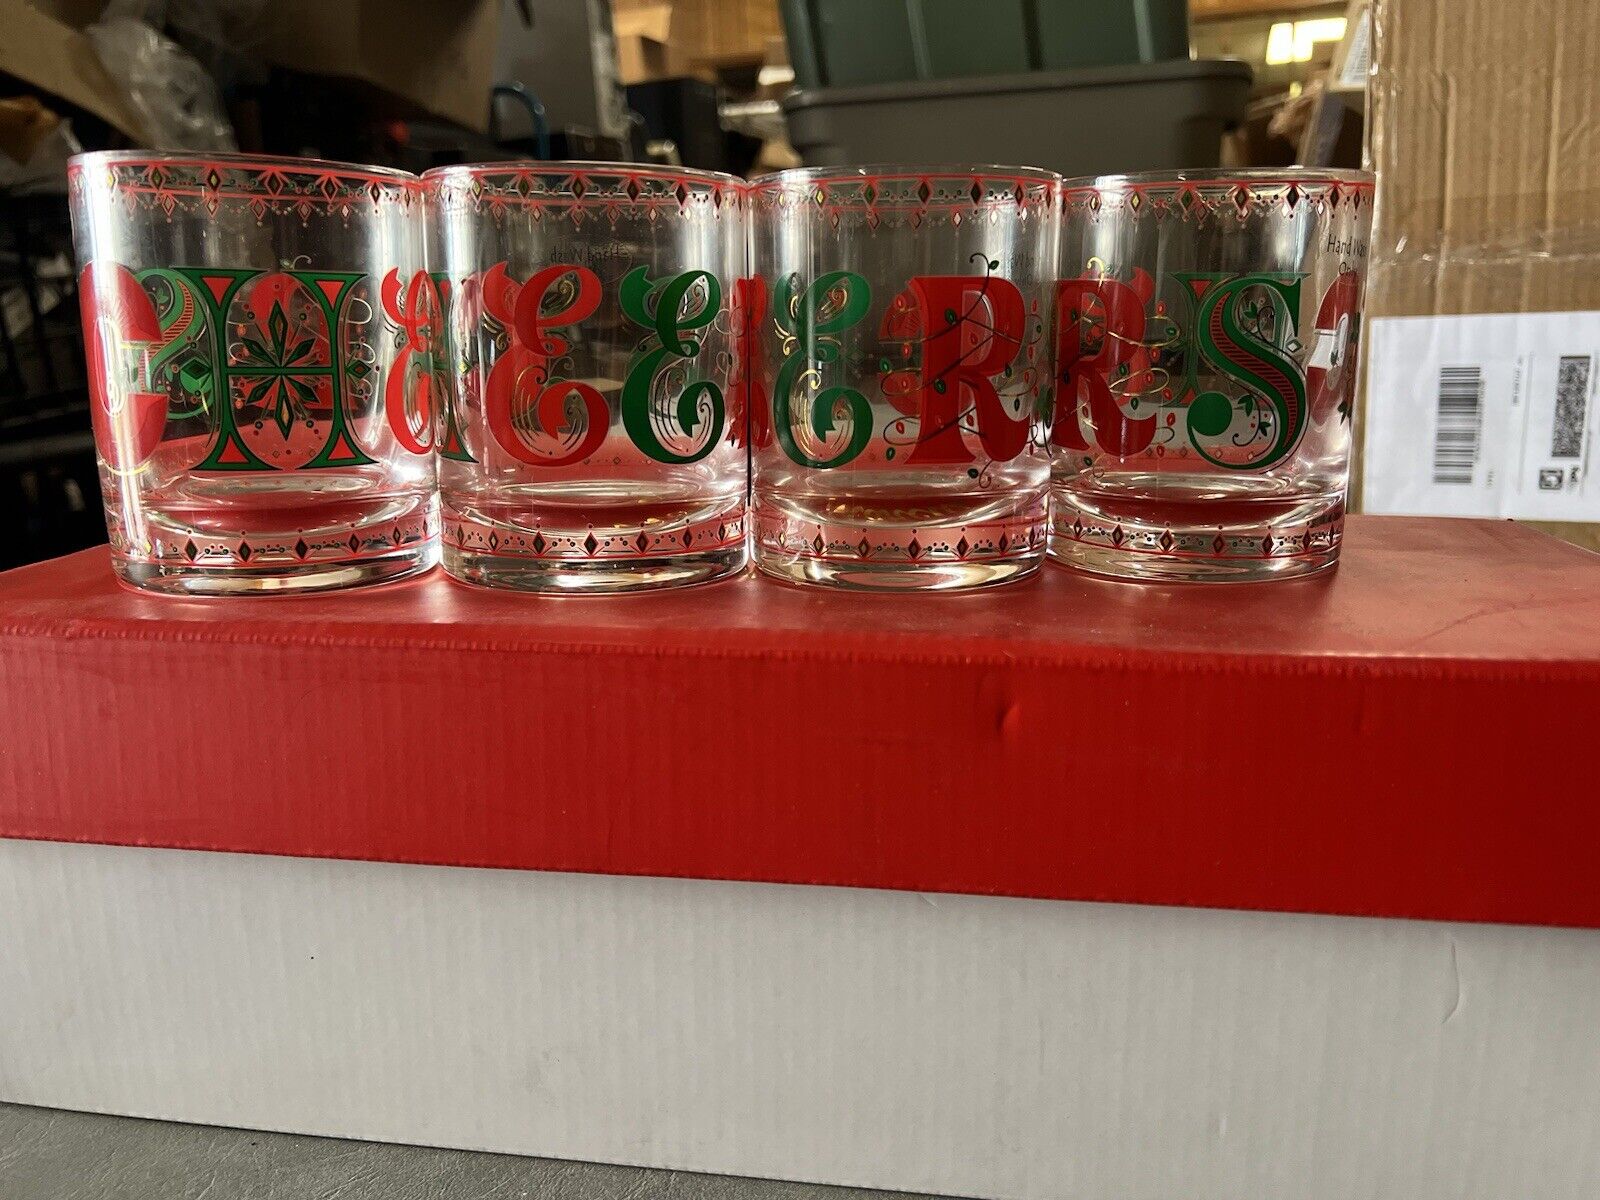 LOT OF 4 Neiman Marcus Holiday Christmas Glasses Cheers collectibles rare